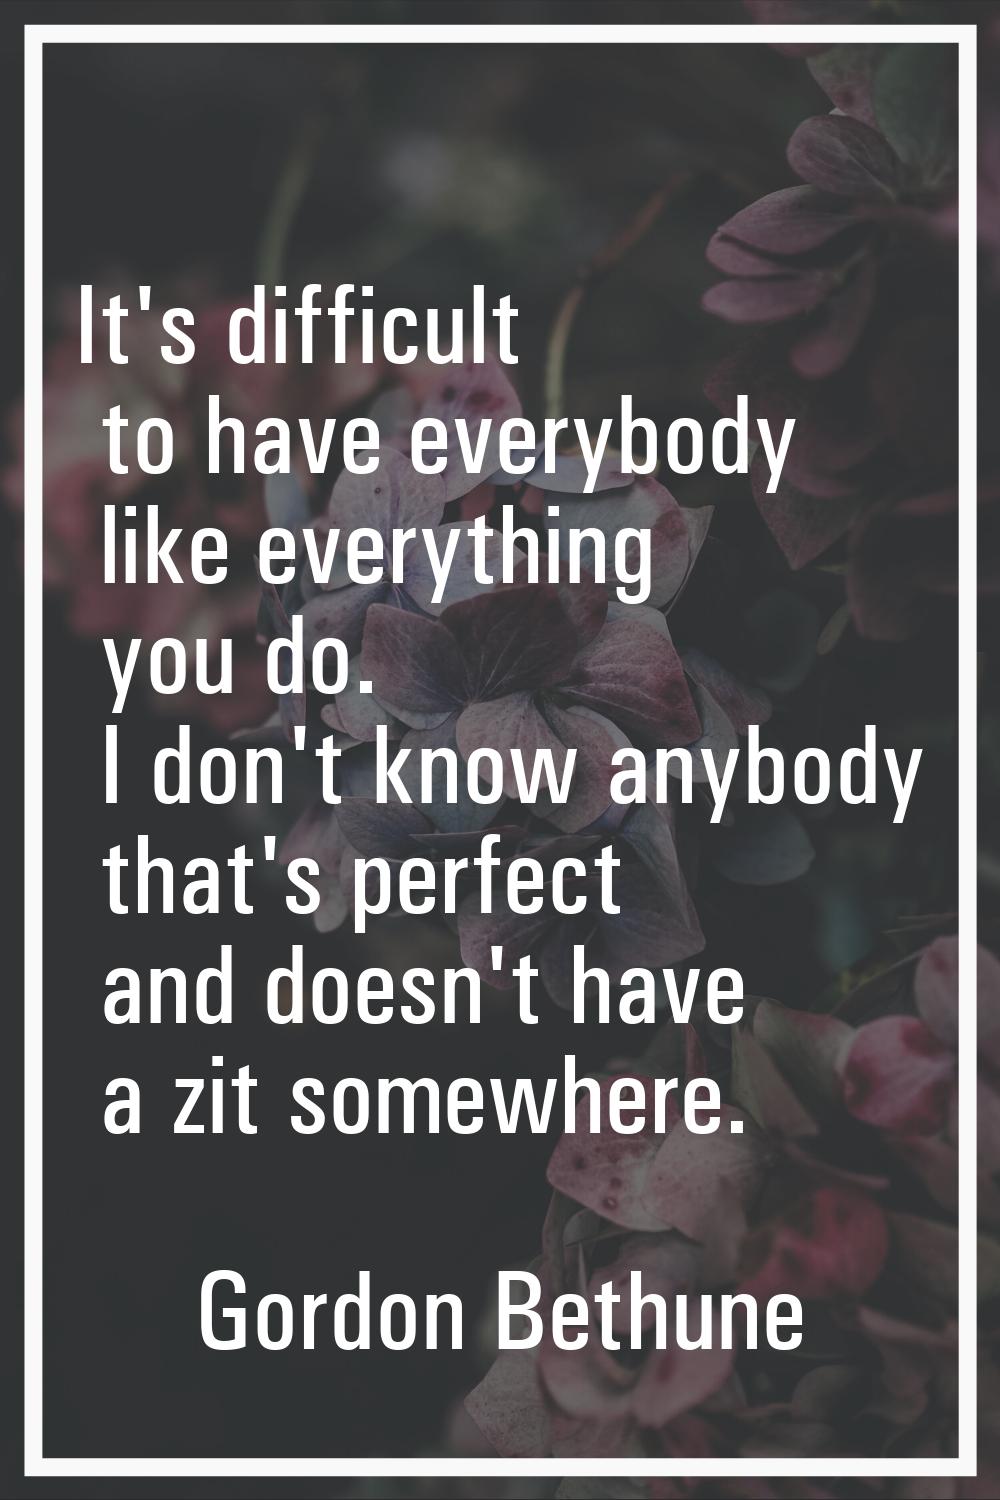 It's difficult to have everybody like everything you do. I don't know anybody that's perfect and do